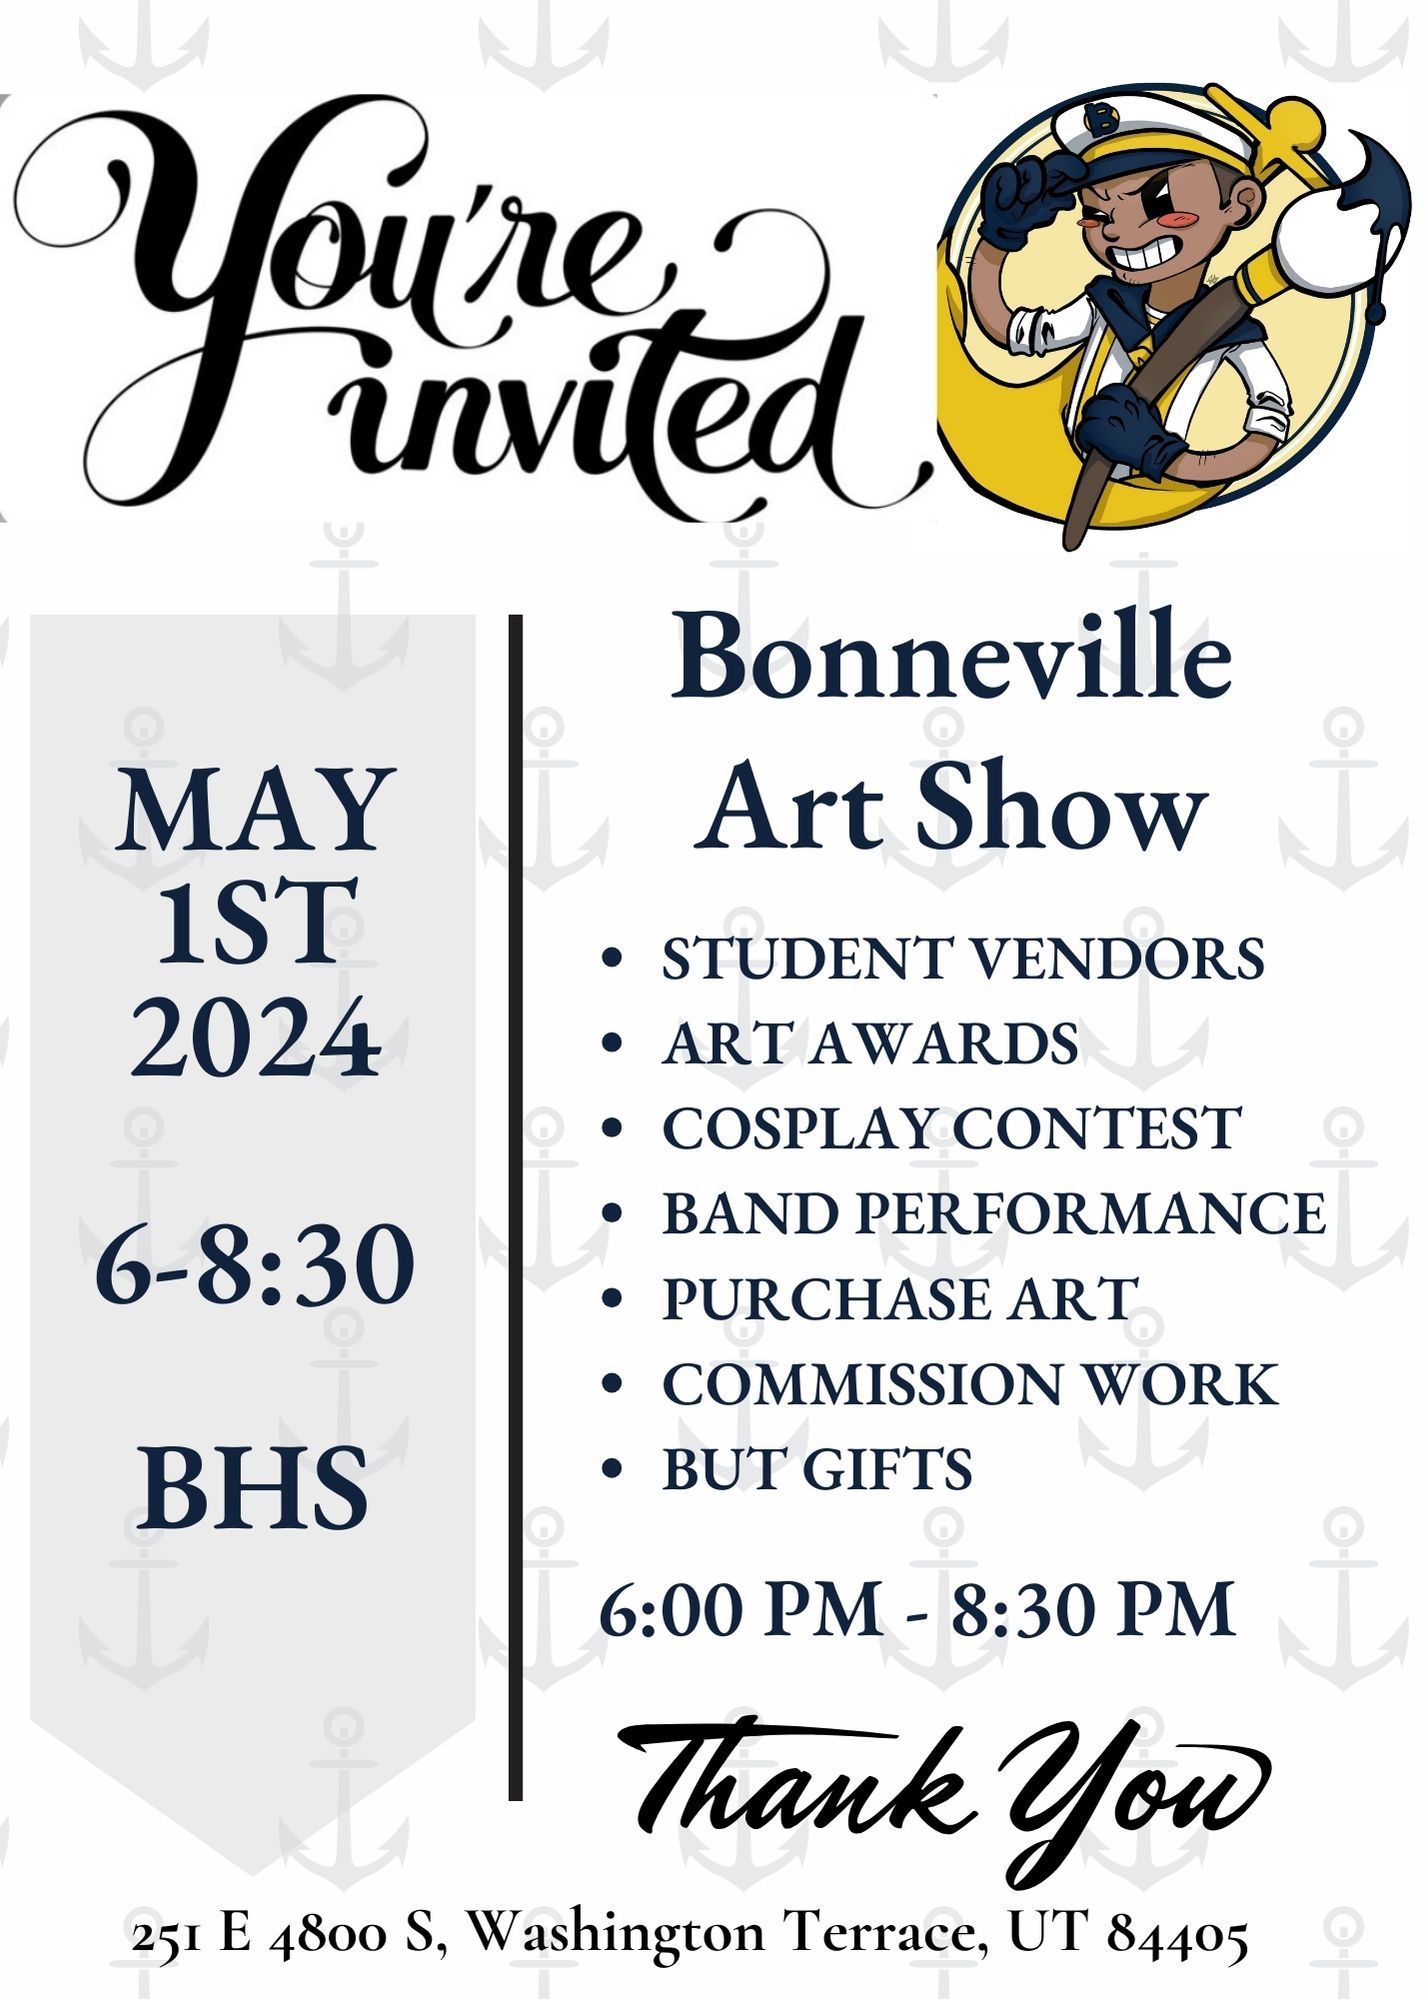 You're Invited, Bonneville Art Show, May 1st 2024 6 to 8:30 PM Student Vendores, Art Awards, Cosplay Contest, Band Performance, Purchase Art, Commission Work, Buy Gifts. 251 E 4800 S, Washington Terrance, UT 84405